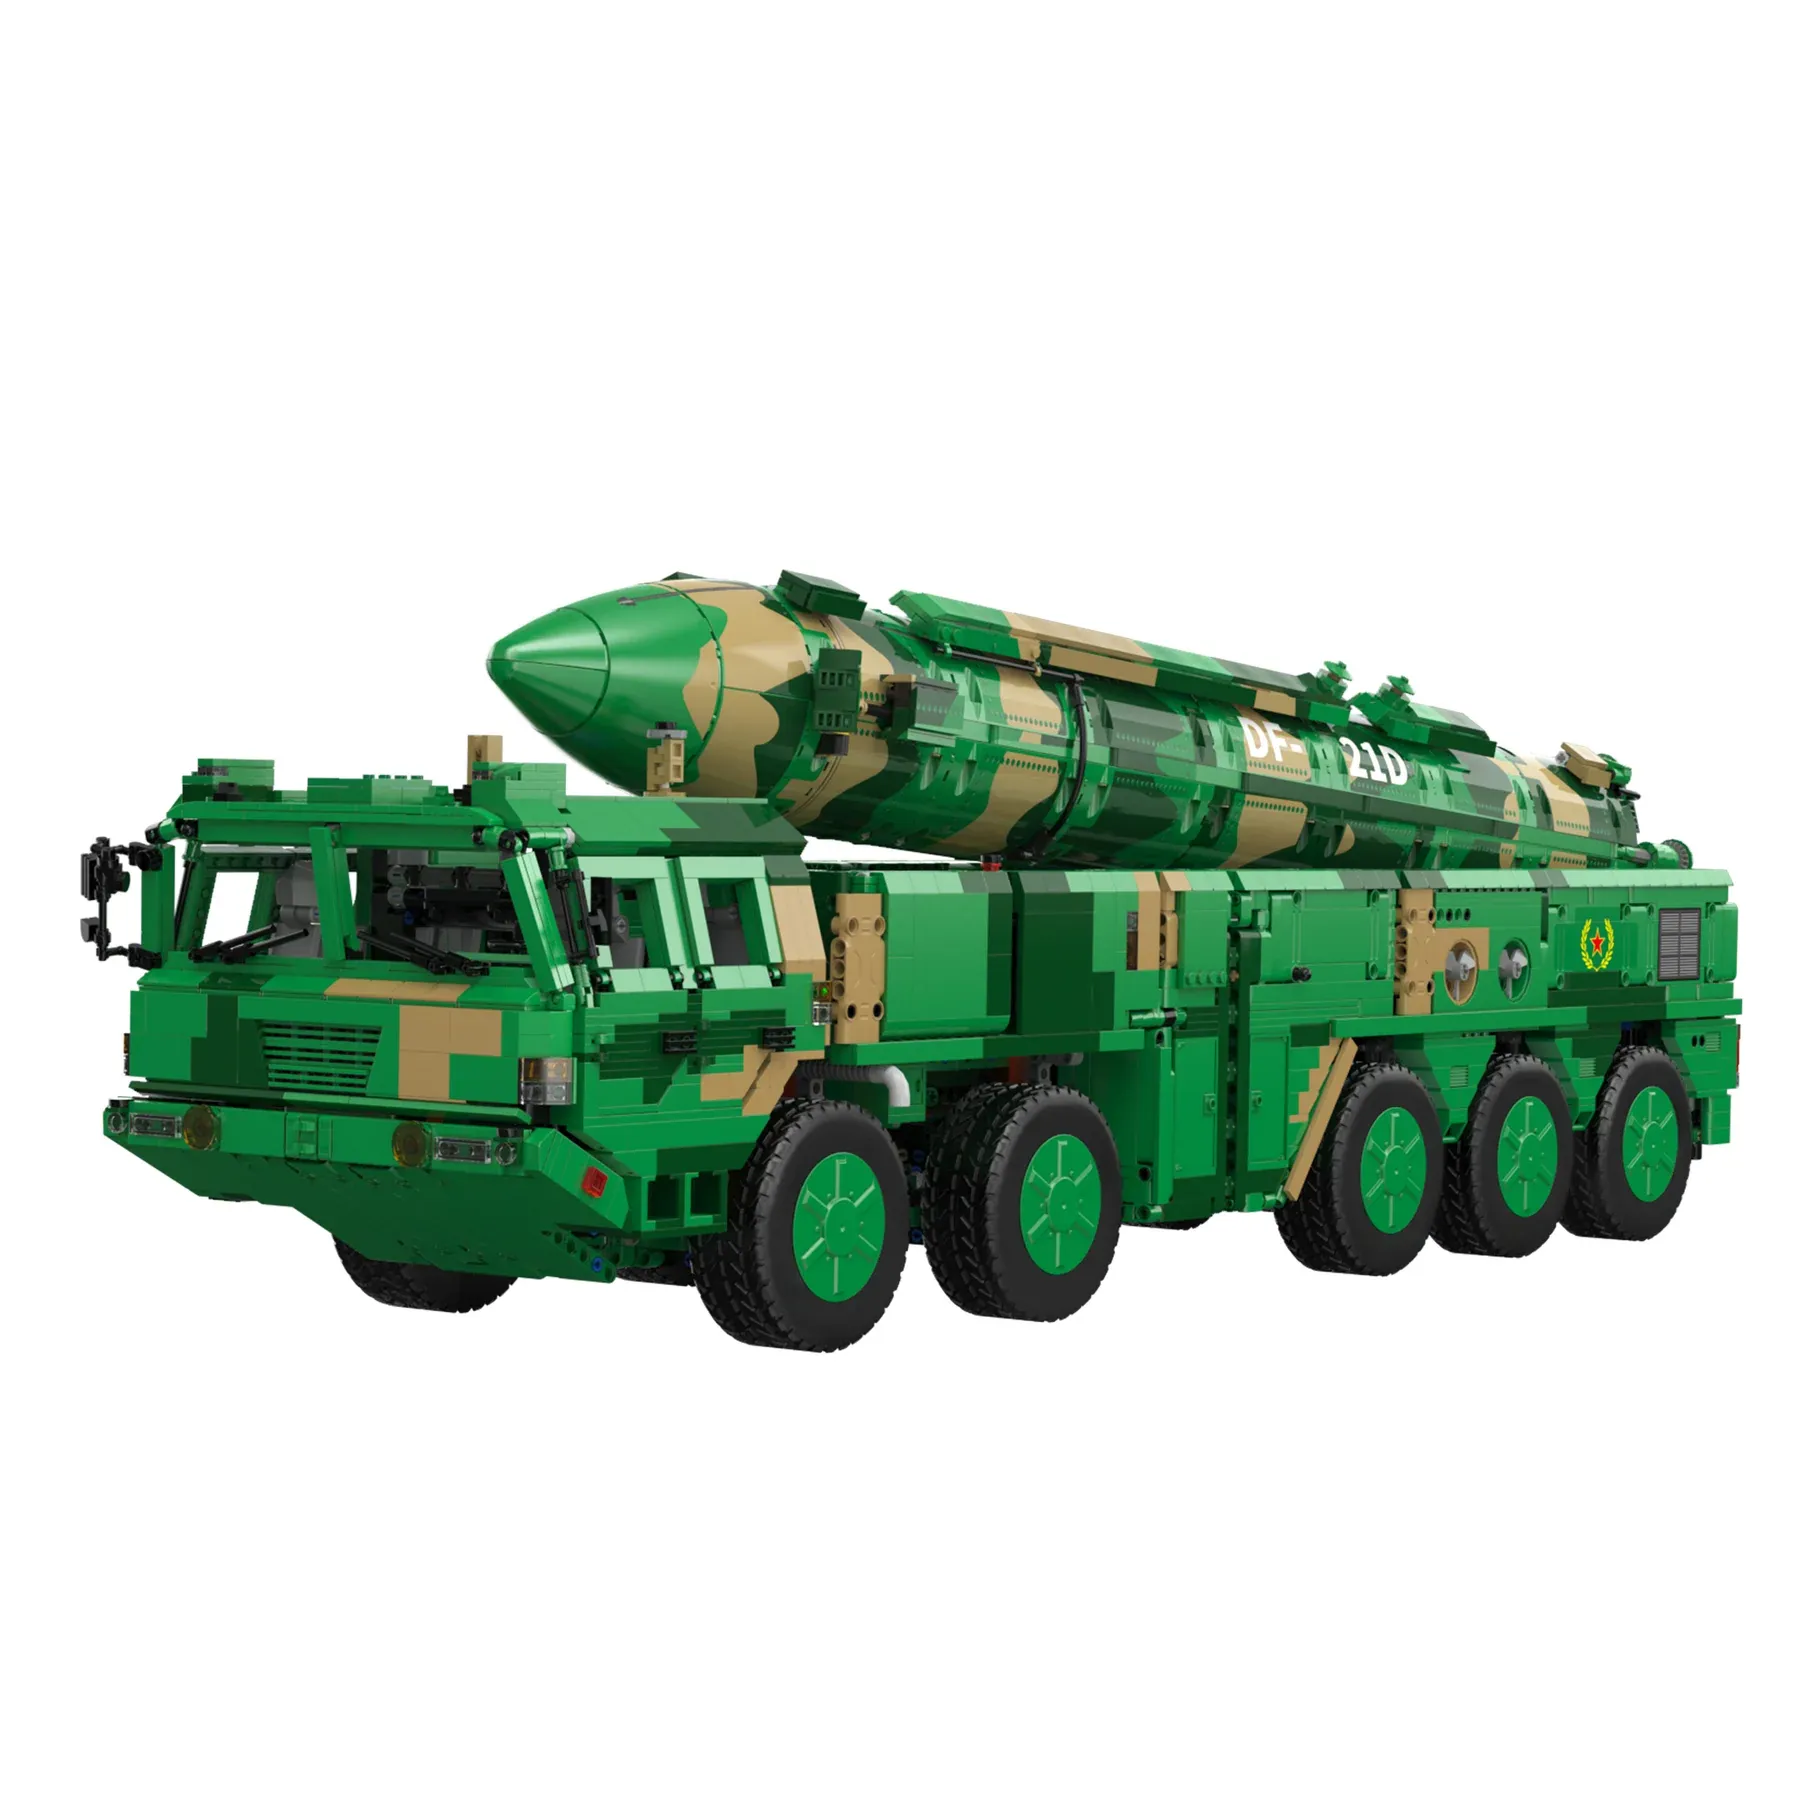 DongFeng-21D Anti-Ship Ballistic Missile Gallery